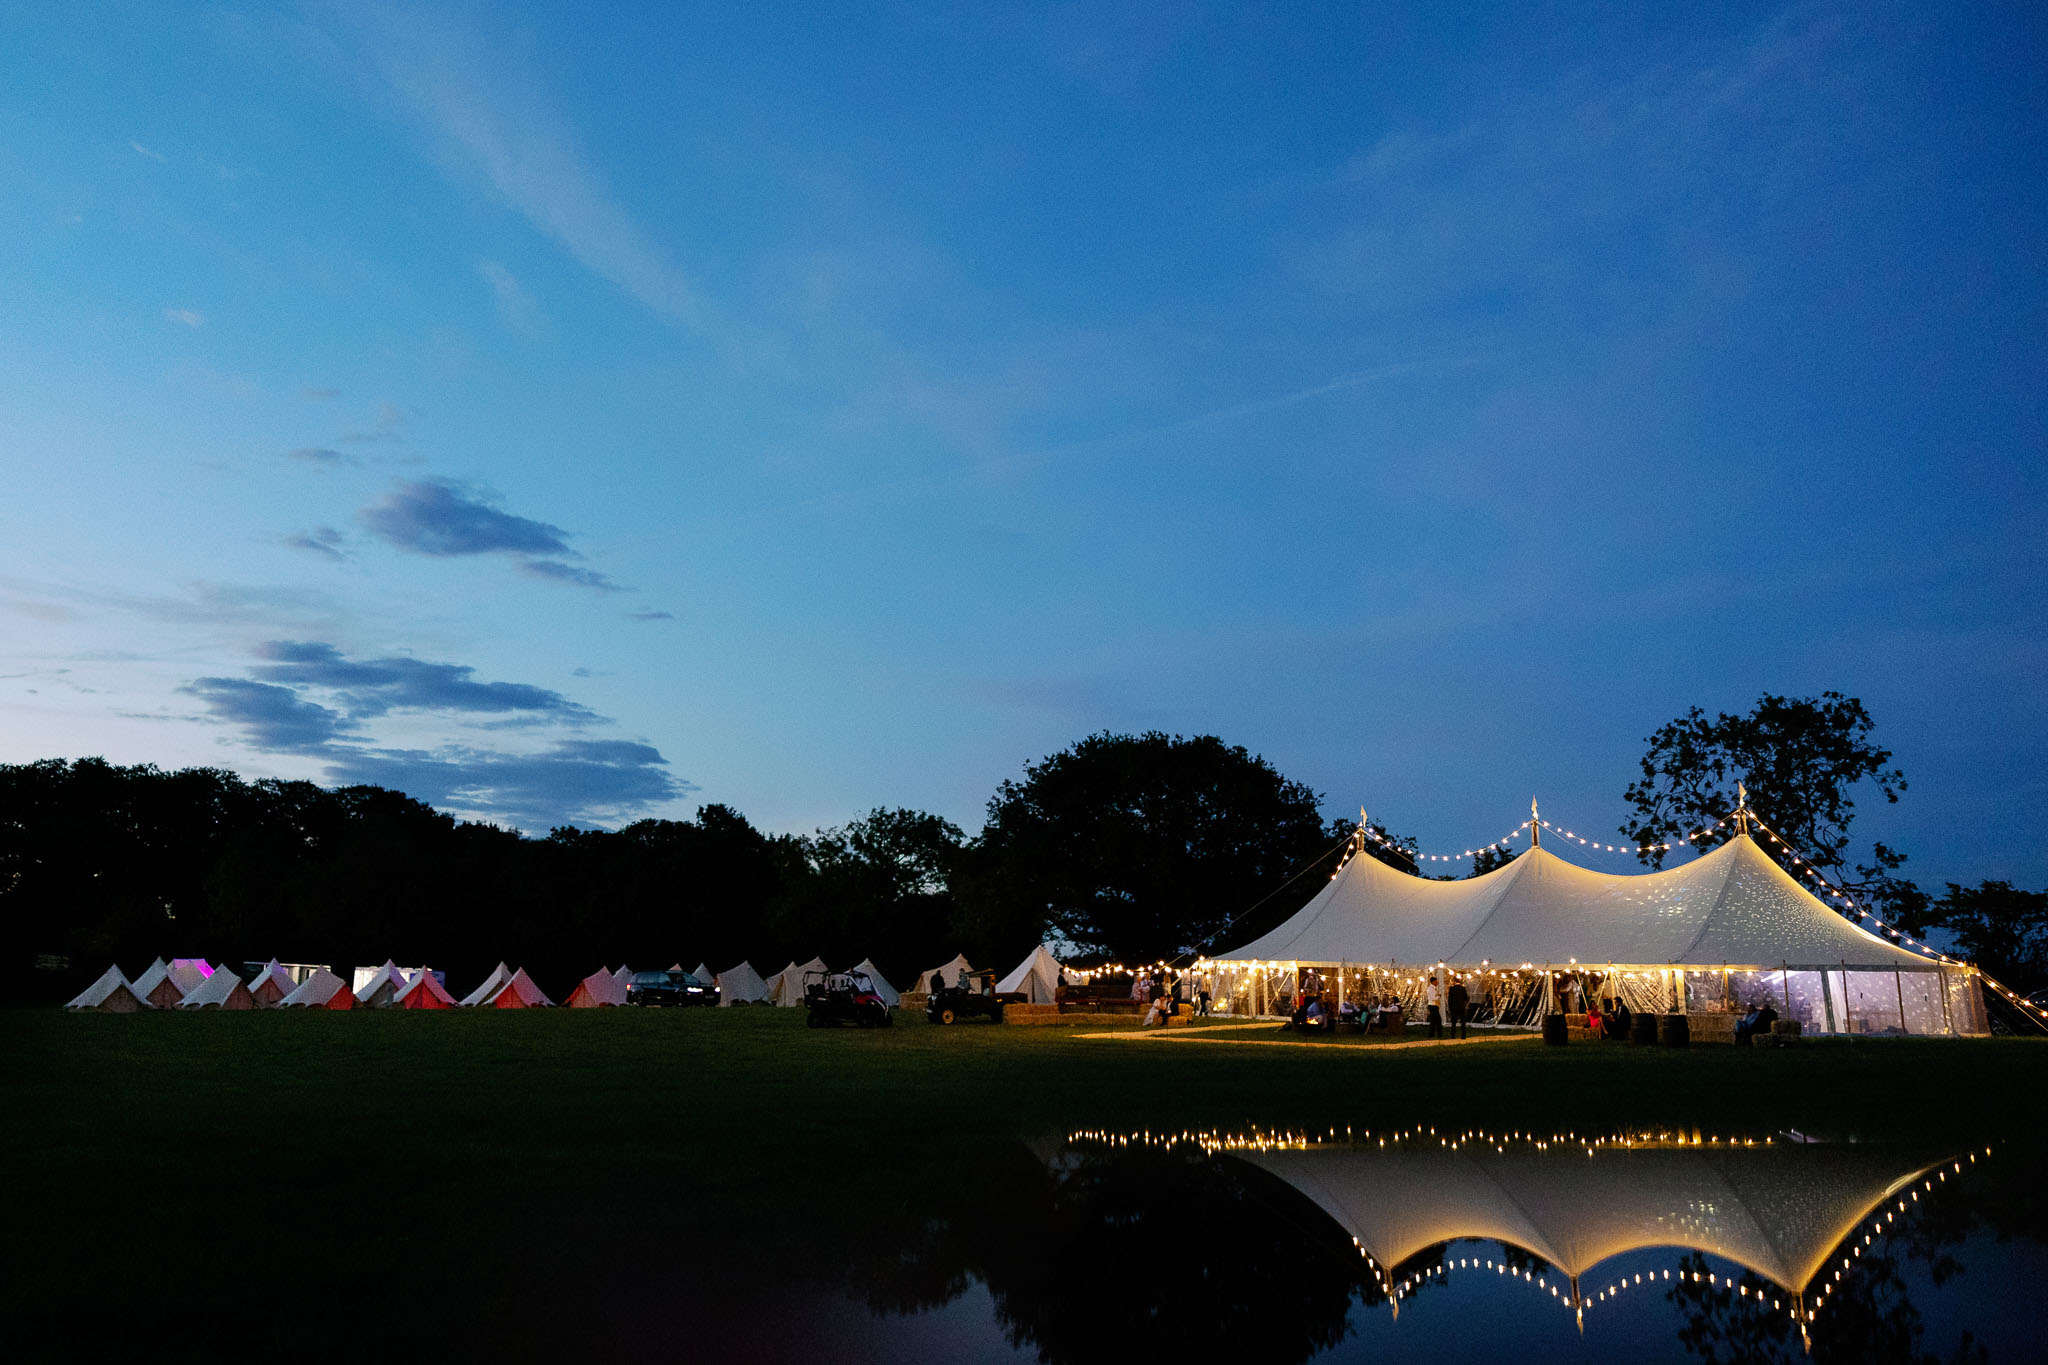 Wills Marquee Tent in the summer evening for a wedding 